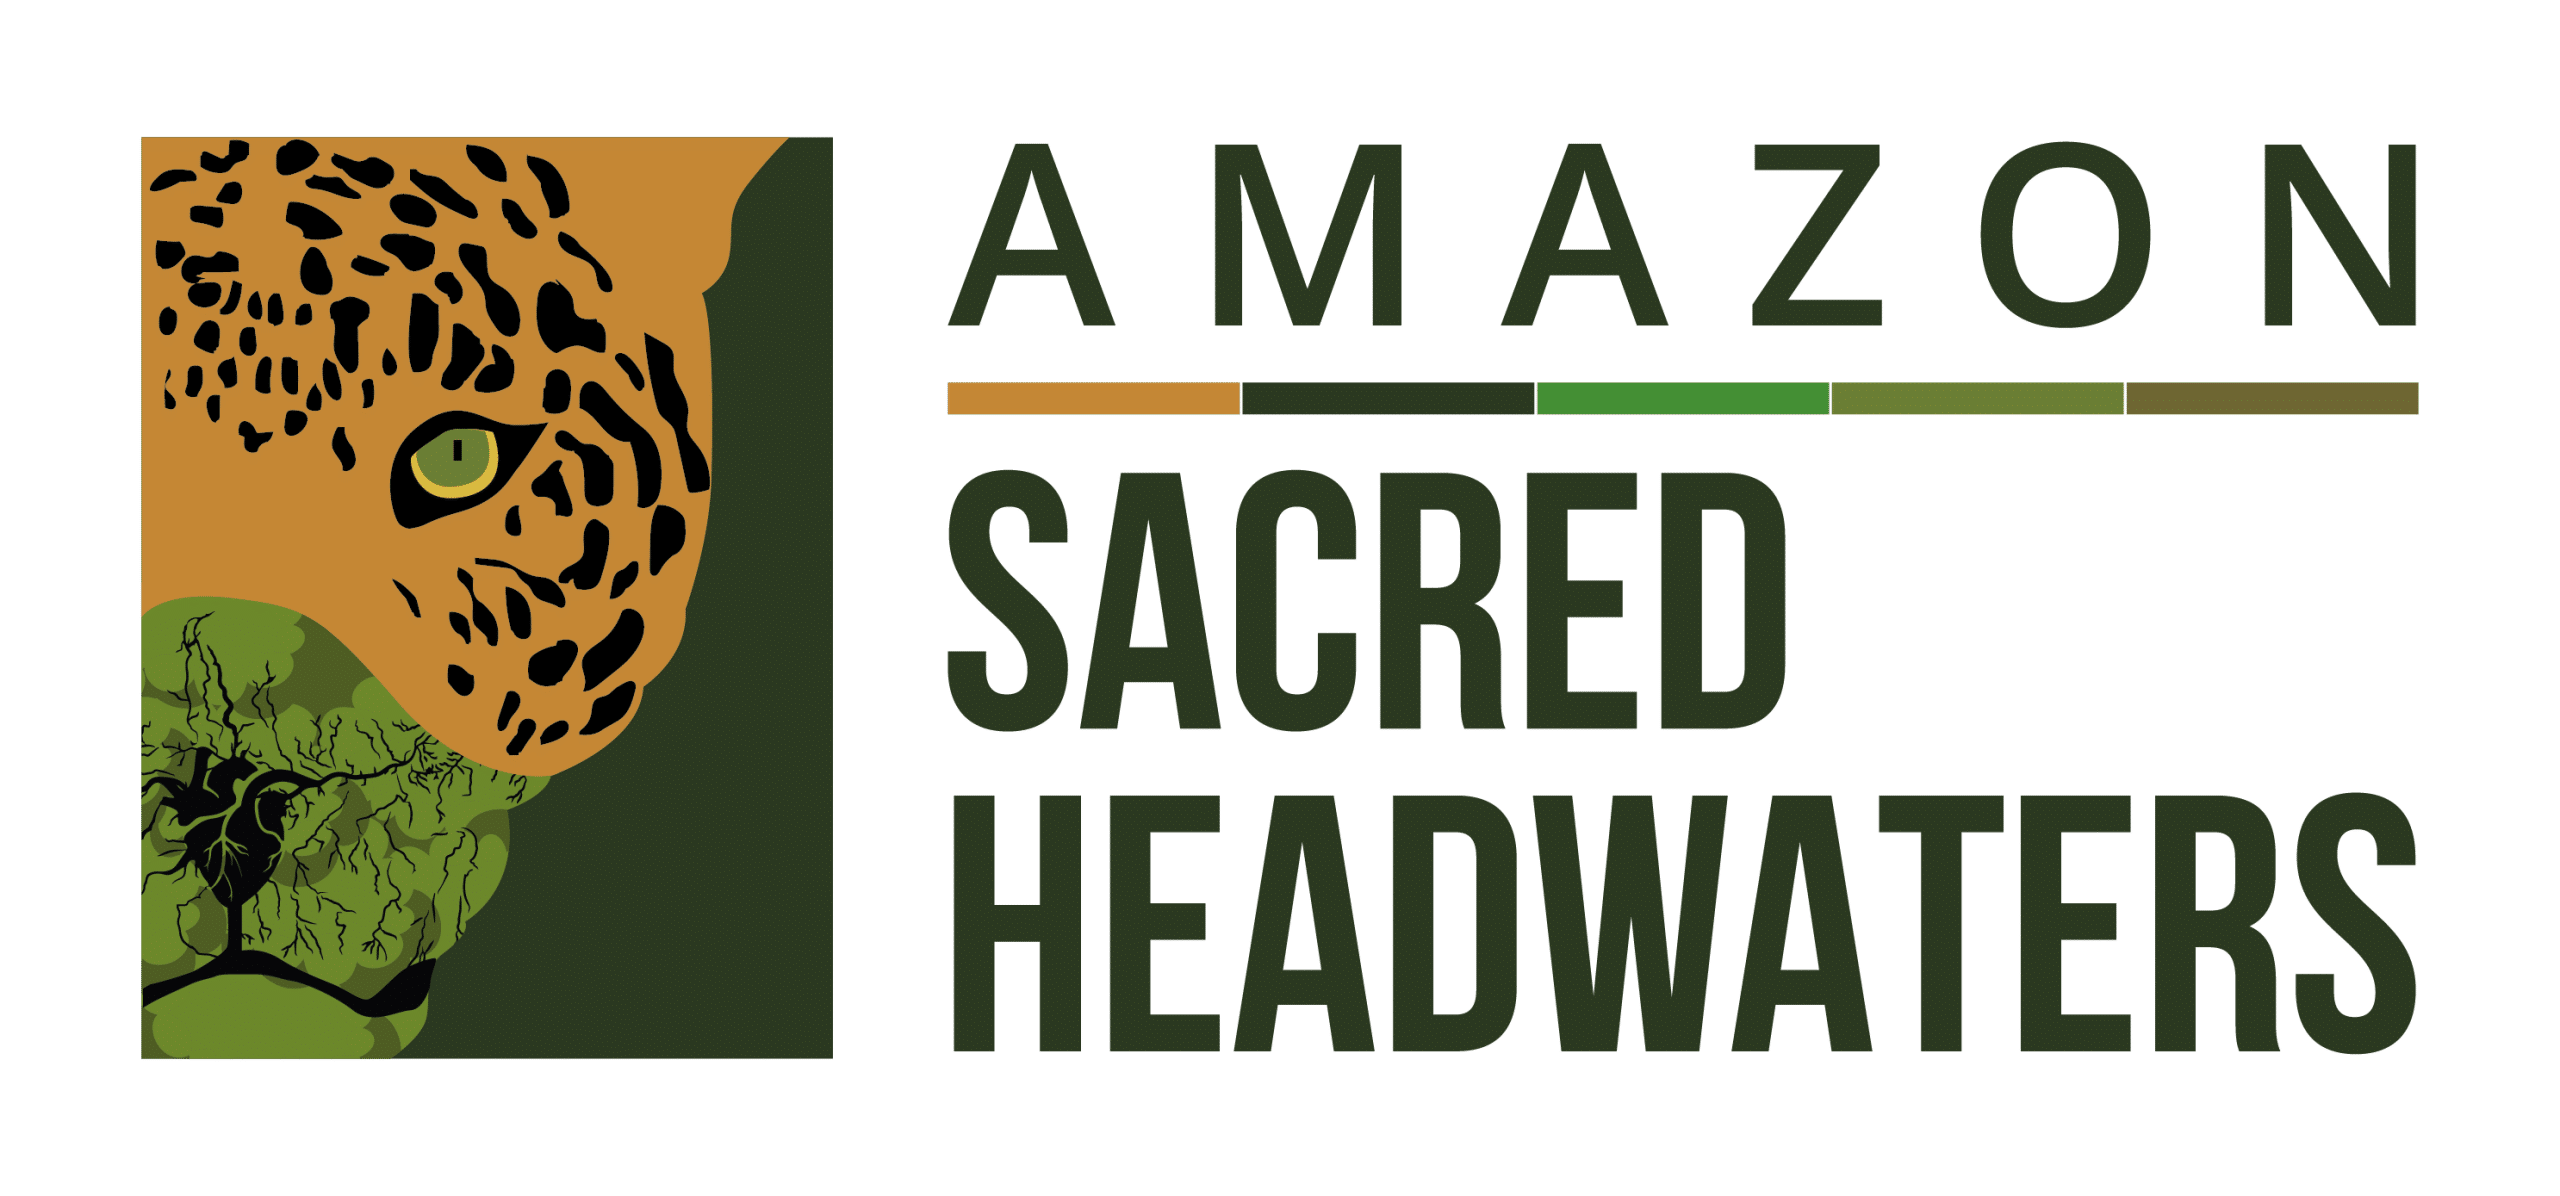 Sacred-Headwaters-2020_Outlines-01